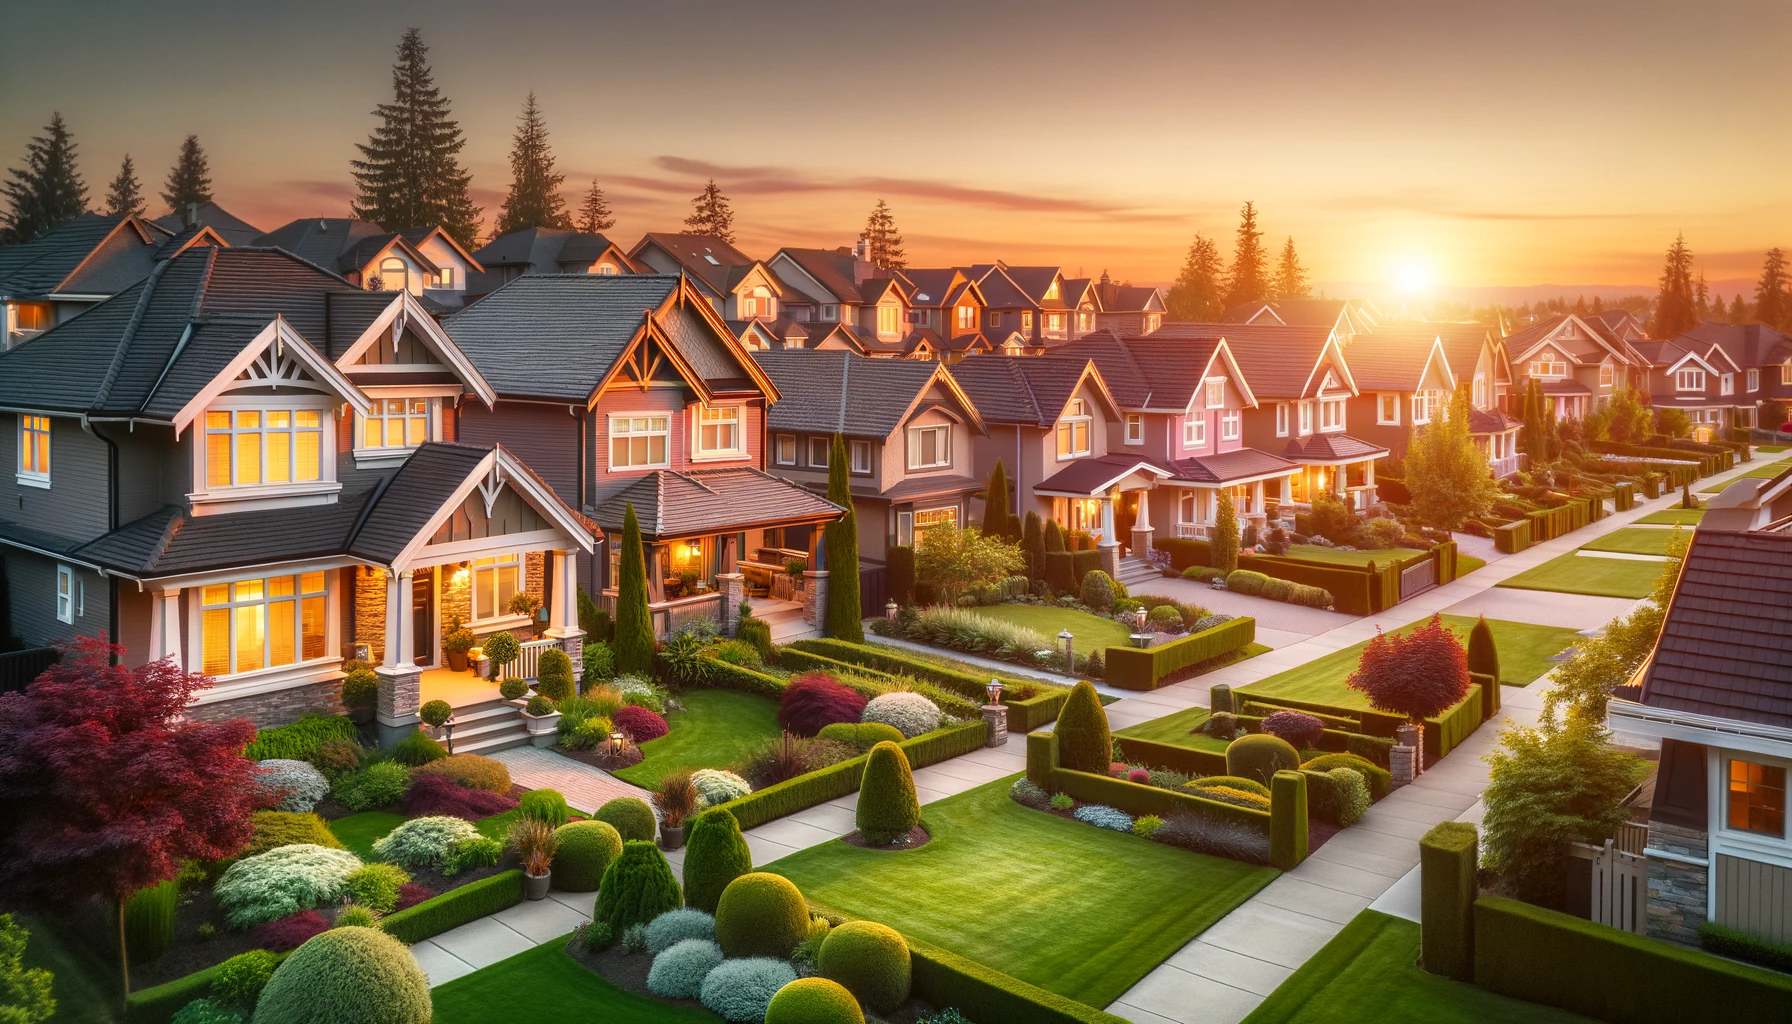 A serene suburban neighborhood at sunset with well-maintained houses and manicured lawns, epitomizing the impact of effective property staging and curb appeal in real estate.